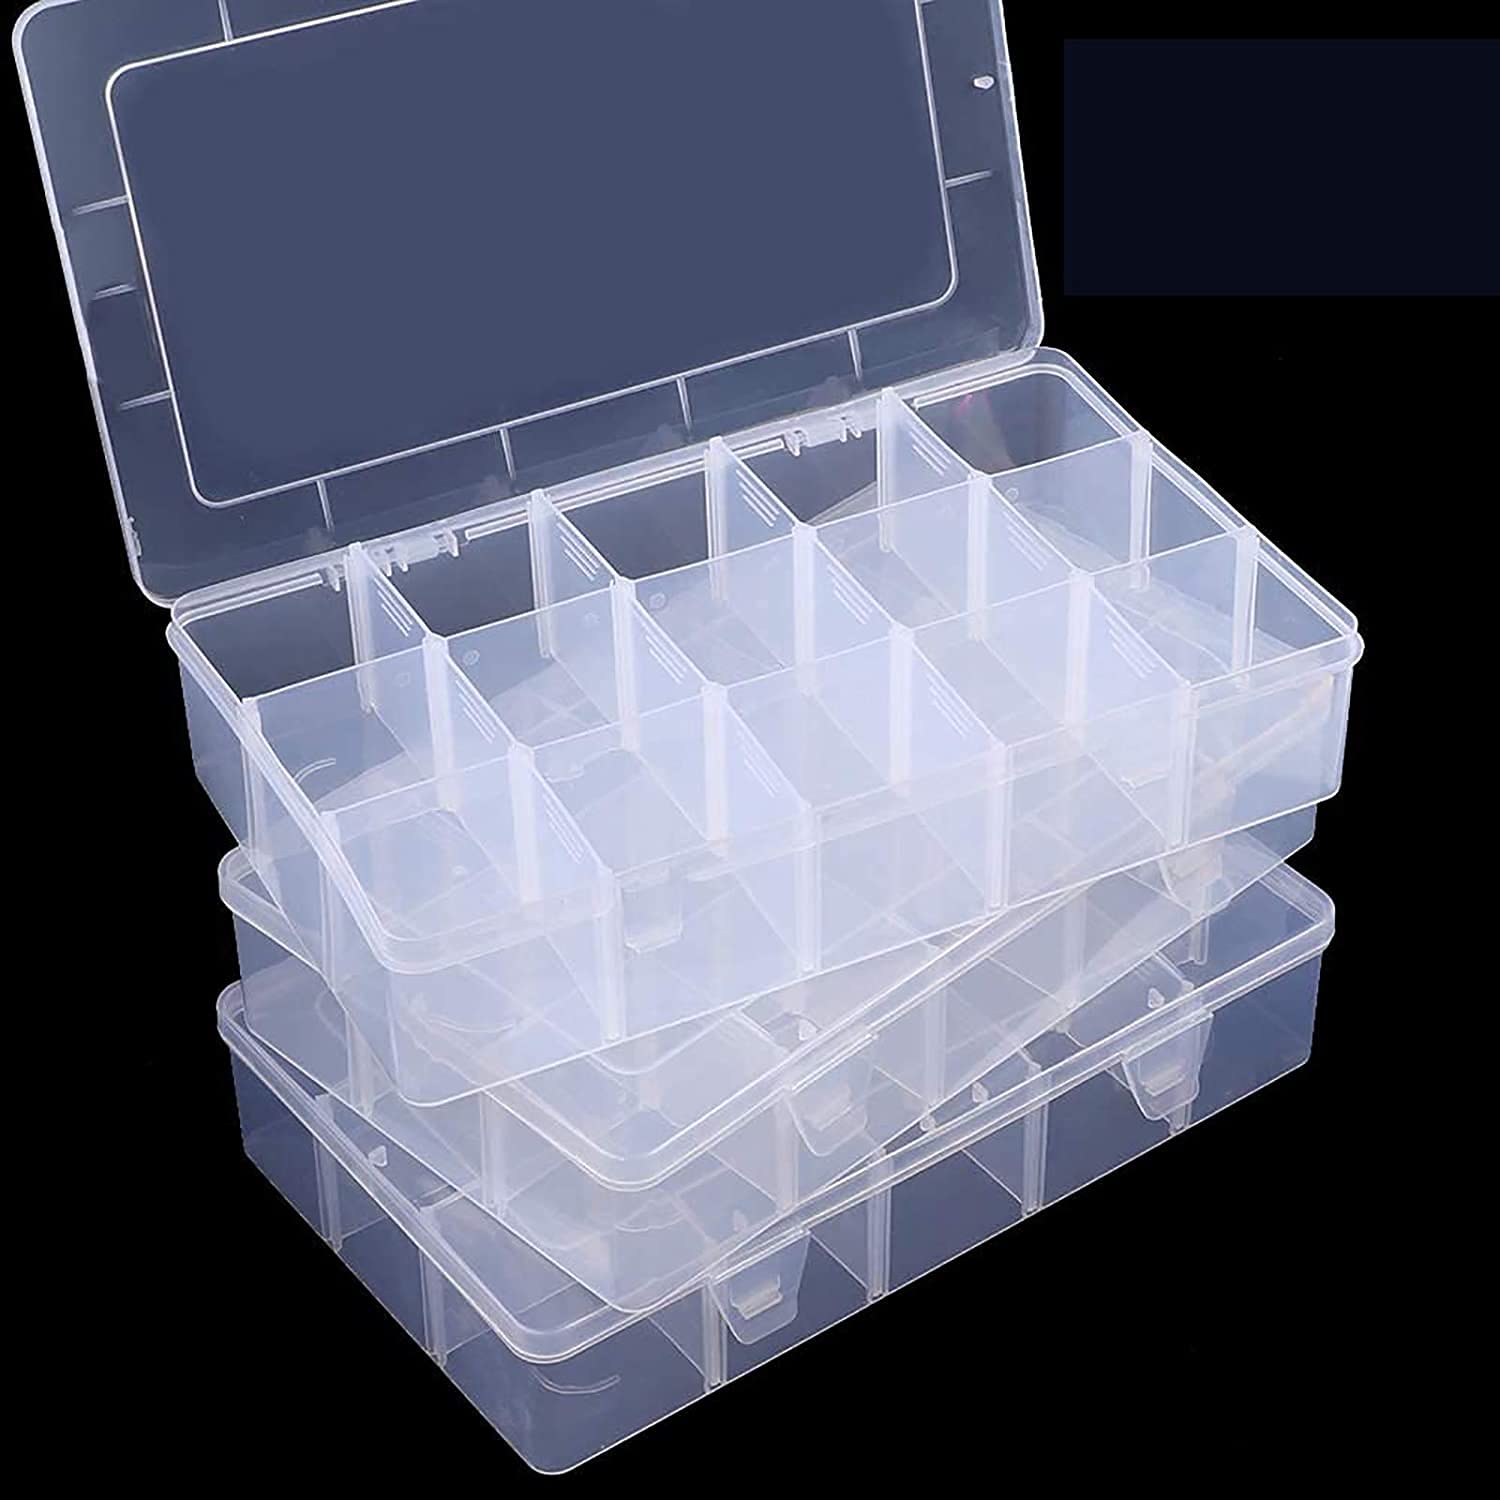 Compartment Organizer Box With Dividers - Set Of 3 Transparent